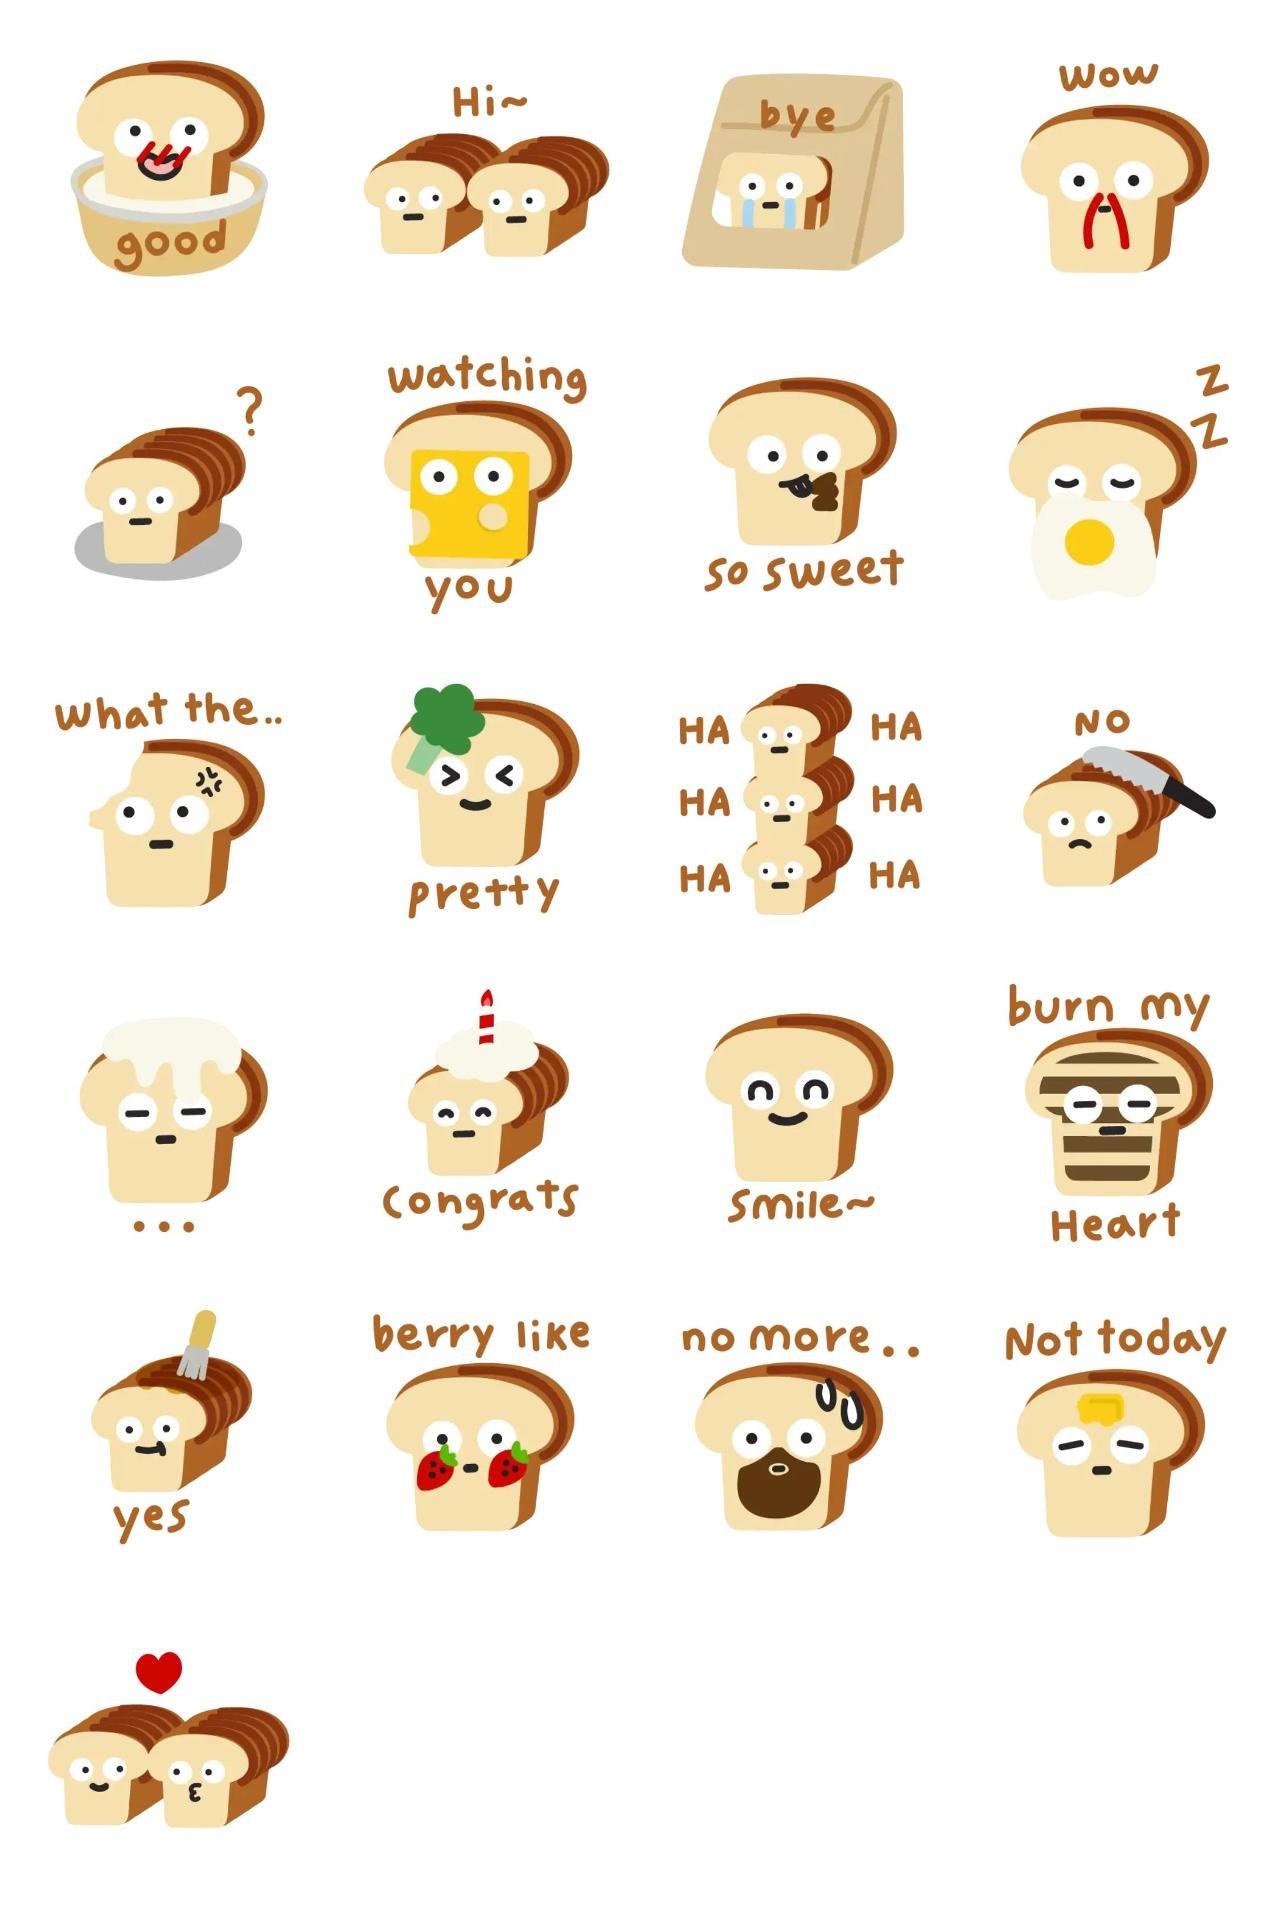 Hi bread Animation/Cartoon,Food/Drink sticker pack for Whatsapp, Telegram, Signal, and others chatting and message apps